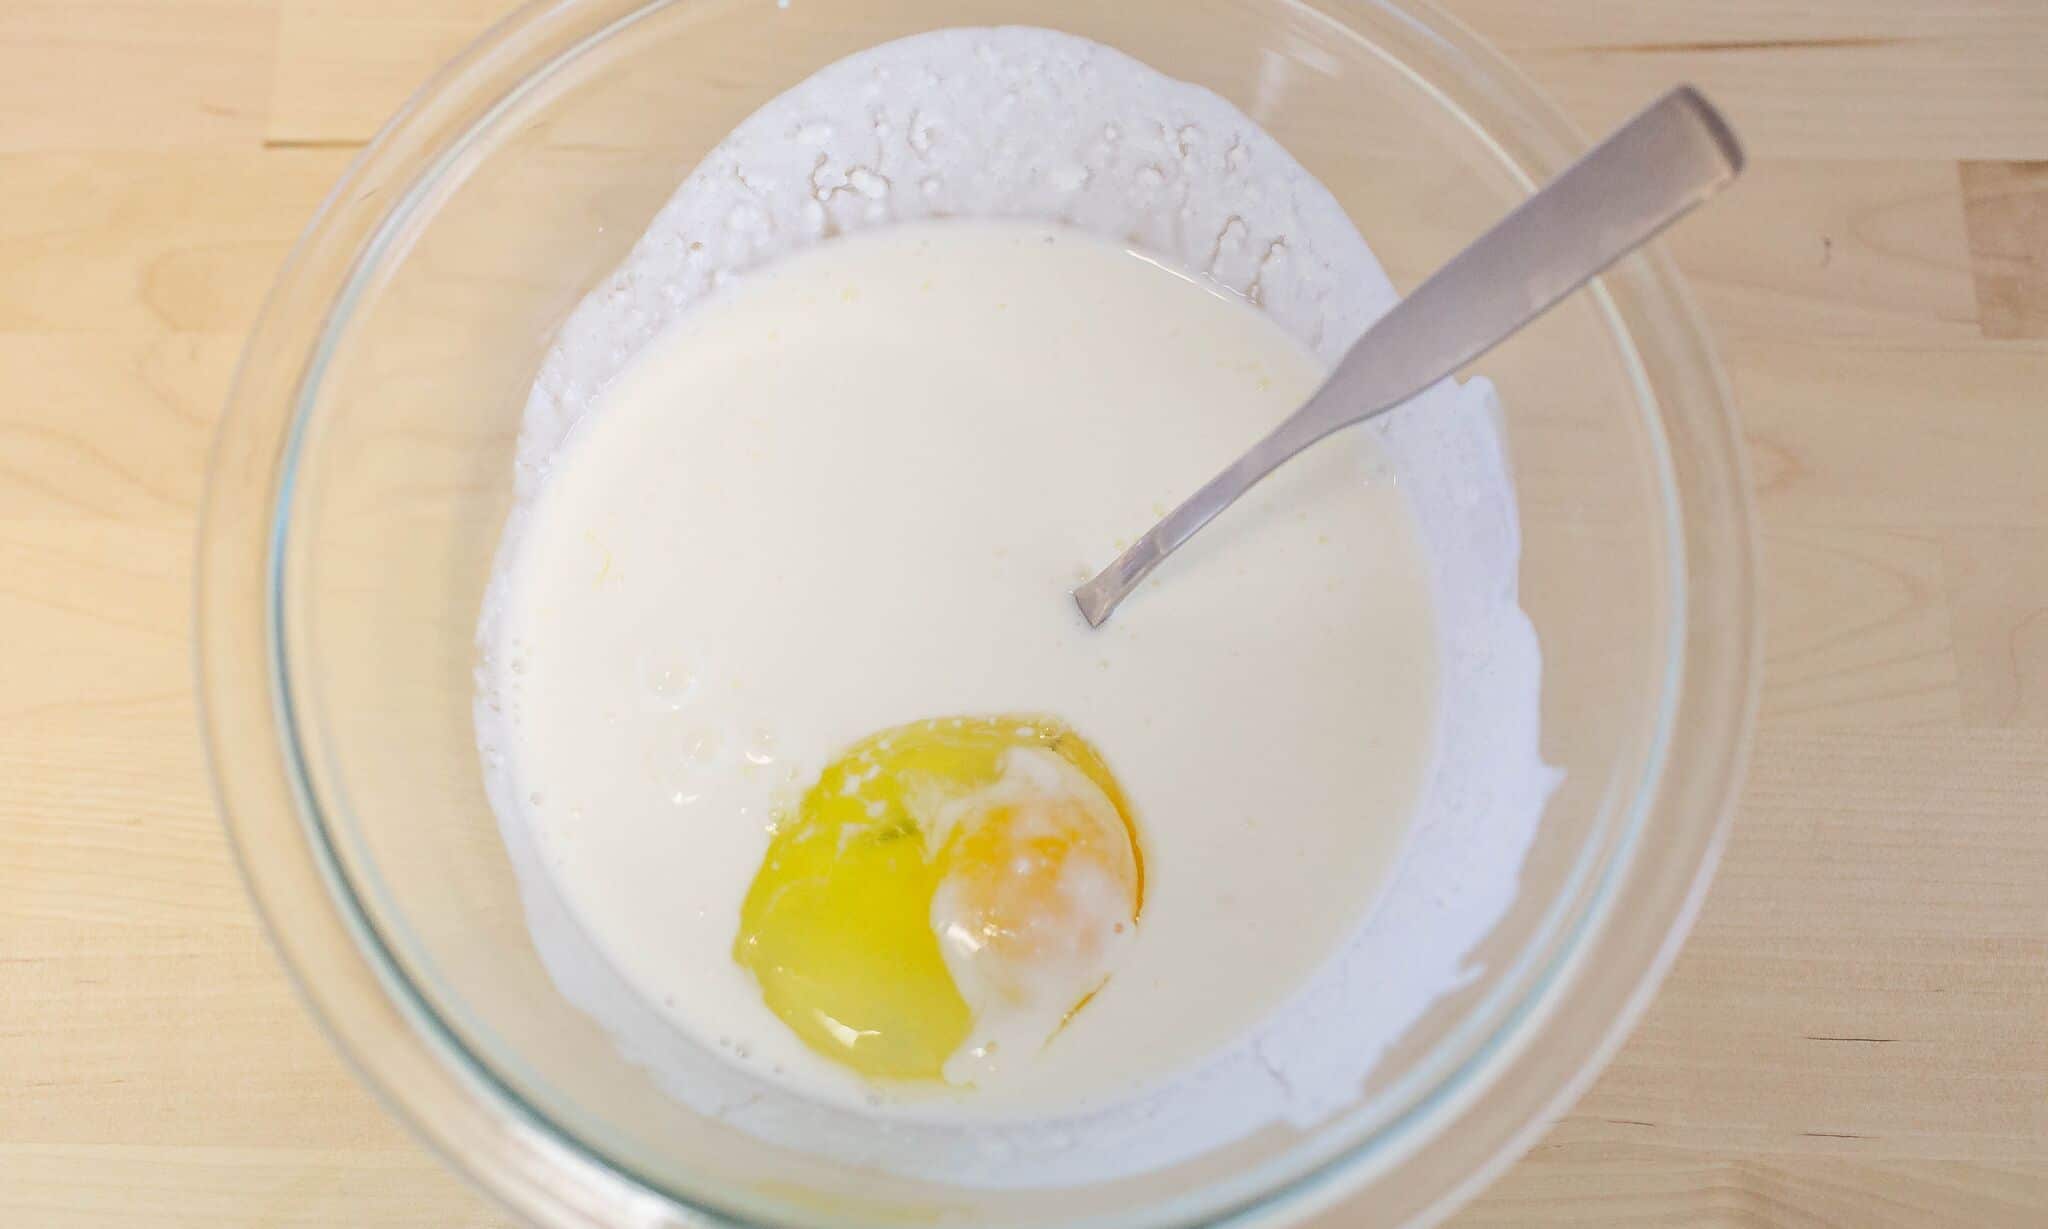 Mix the buttermilk and egg together in a small bowl. 